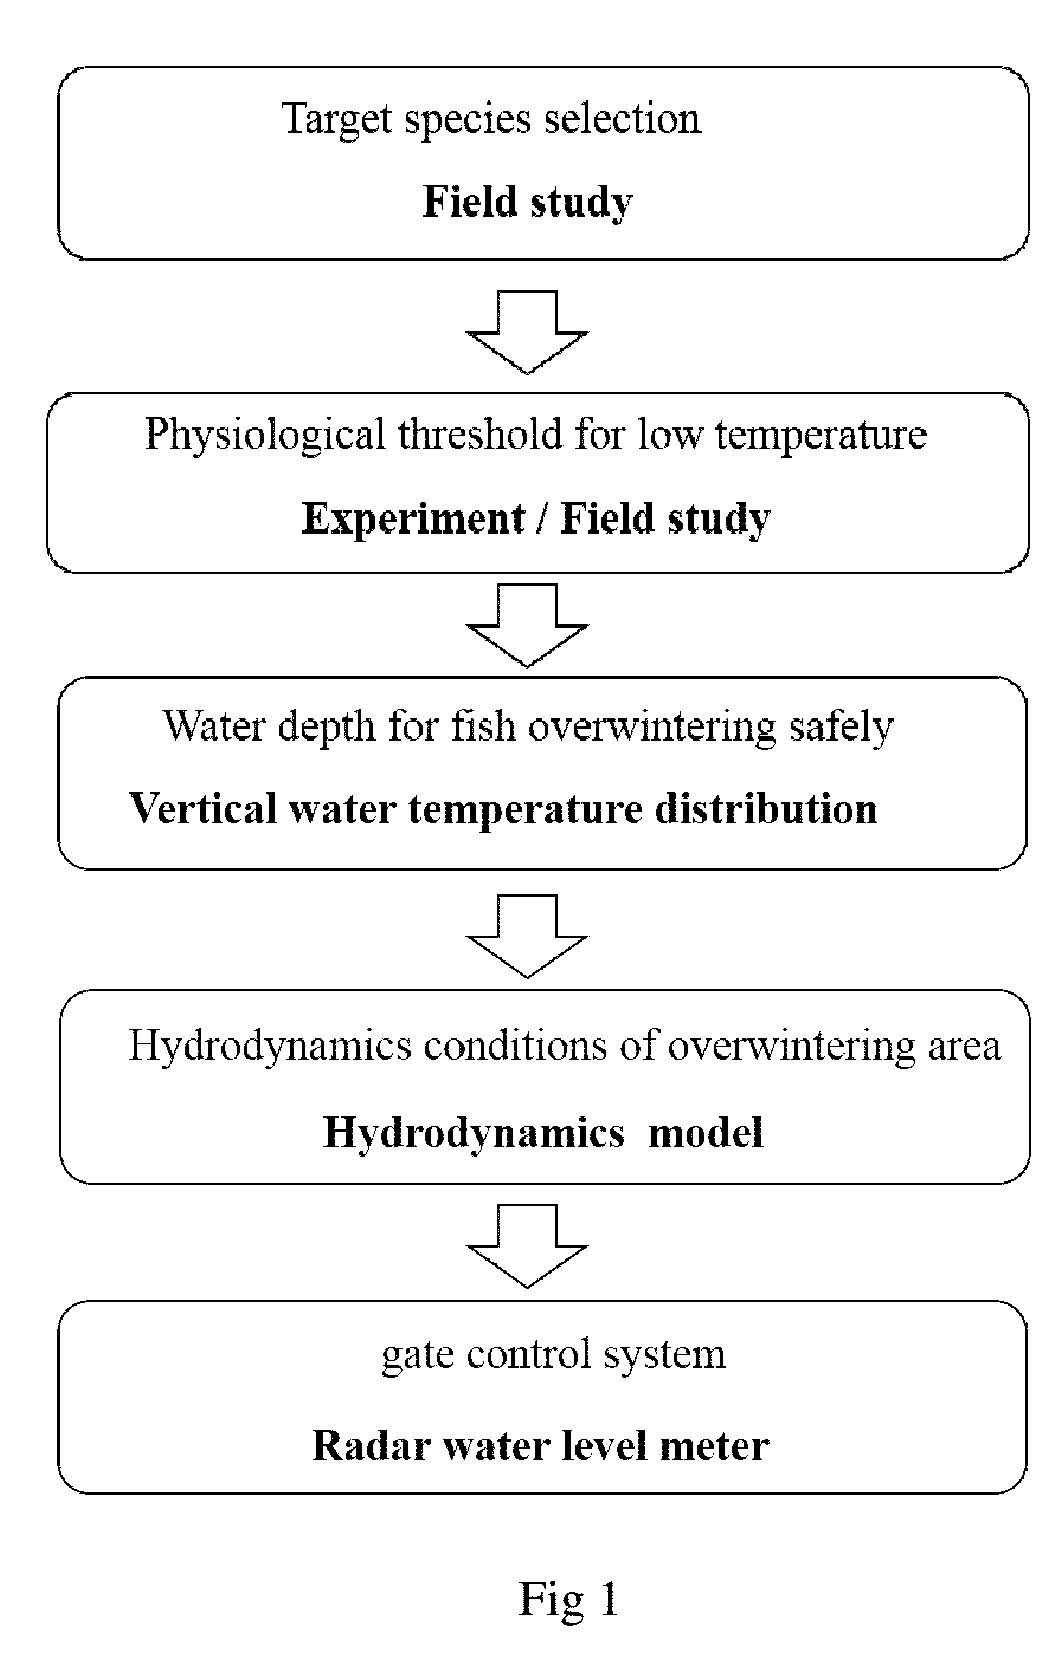 Method for controlling the gate based on the habitat requirement for fish overwintering in rives